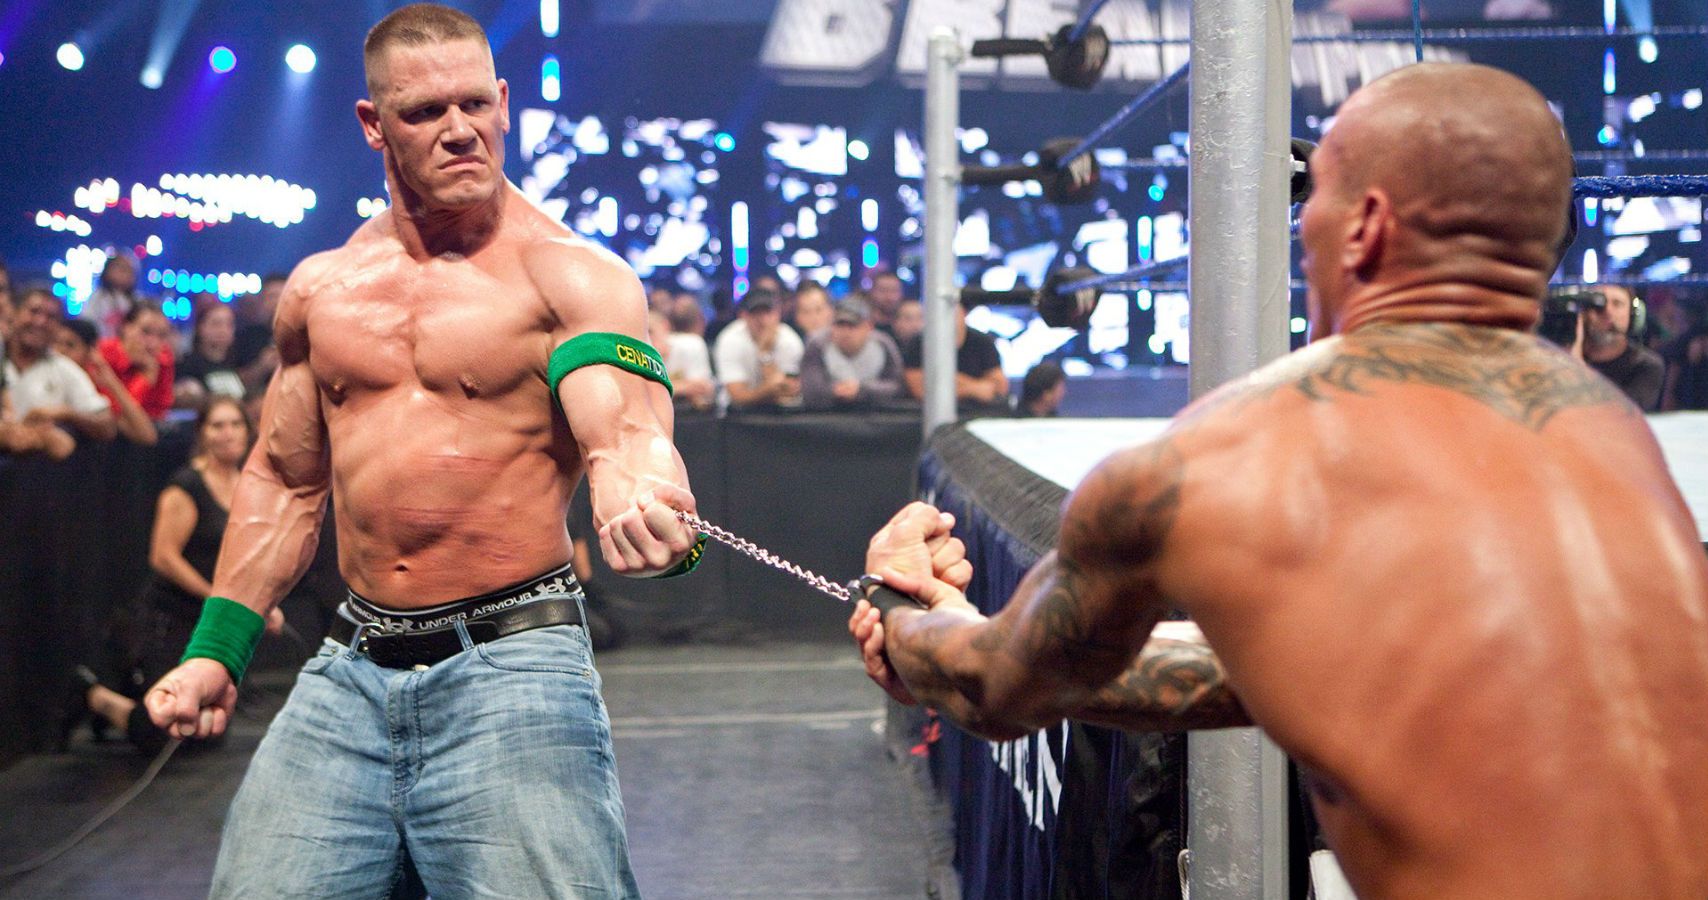 Randy Orton Drags John Cena Into His Quest To Get The Rock At Wrestlemania 